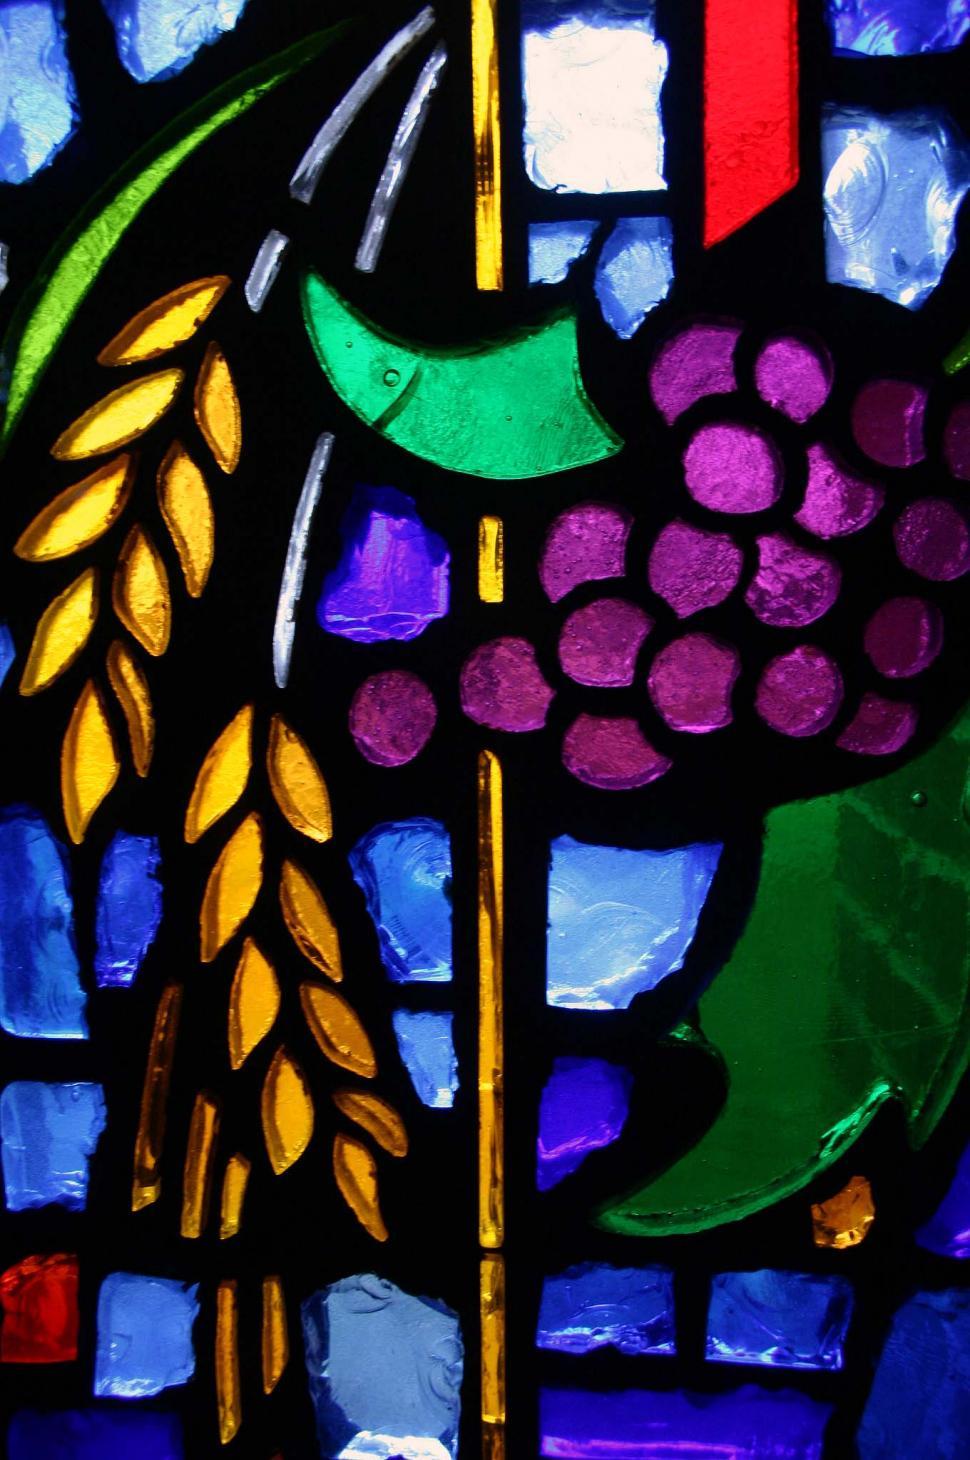 Free Image of Close Up of a Stained Glass Window 